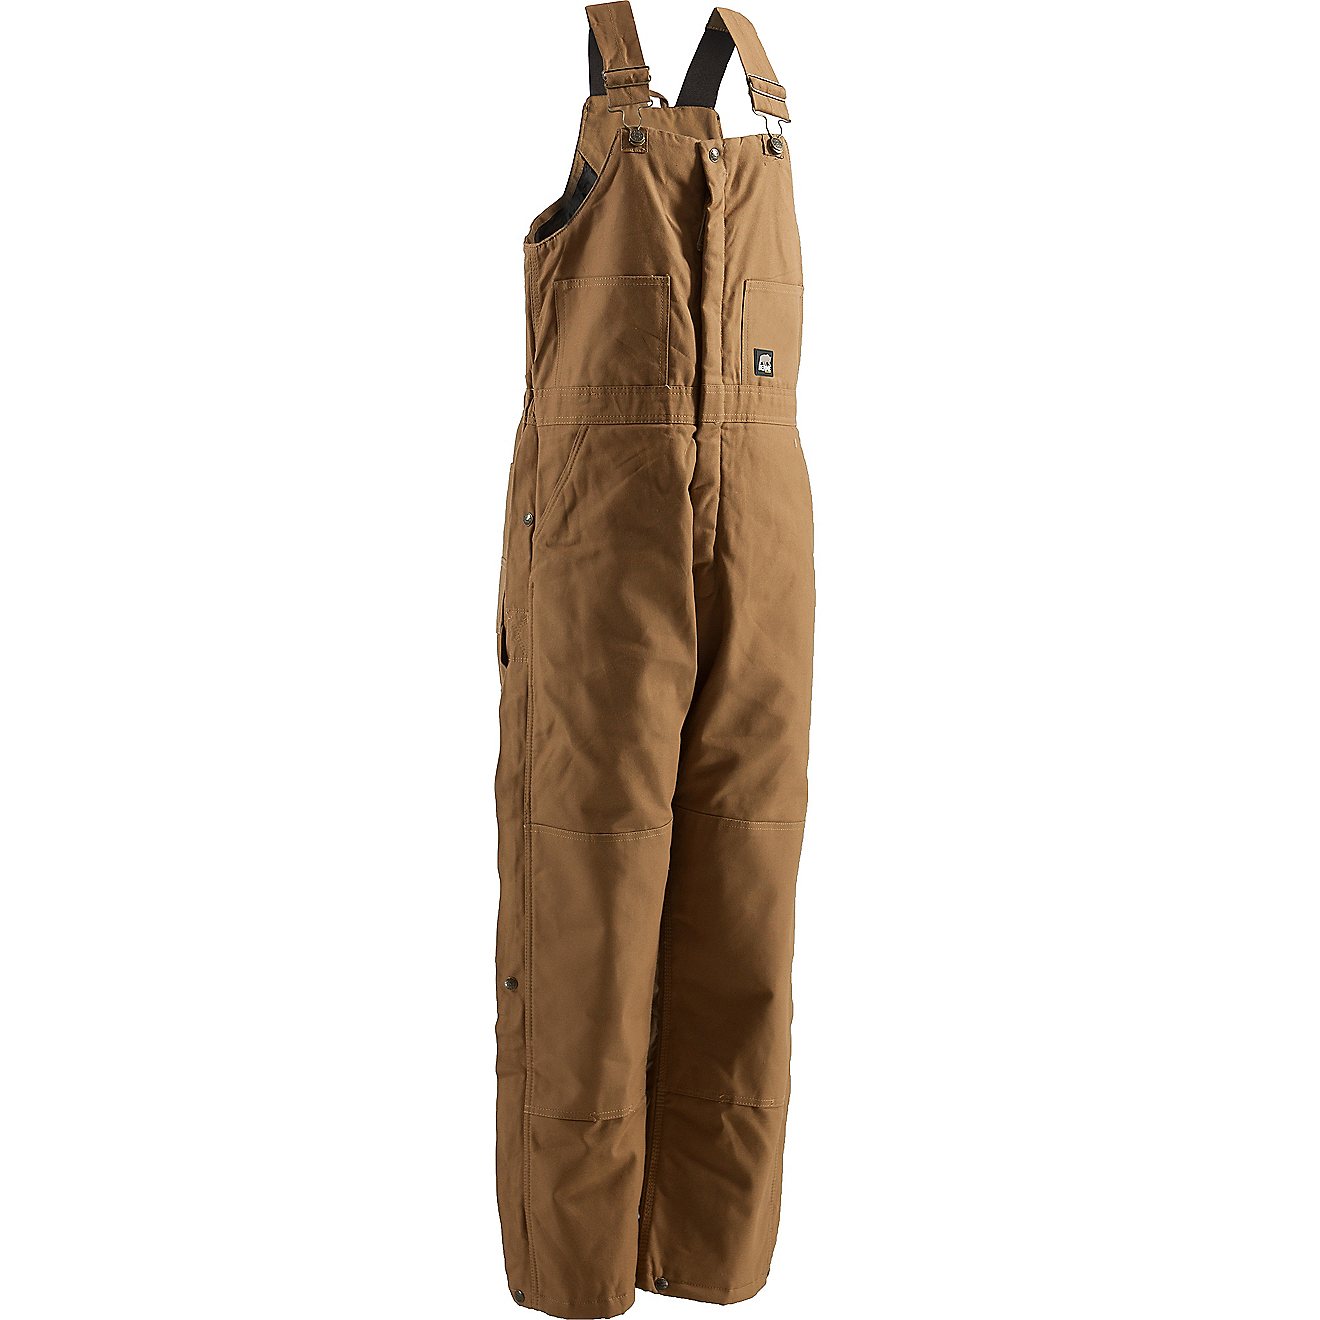 Berne Men's Deluxe Insulated Coverall 